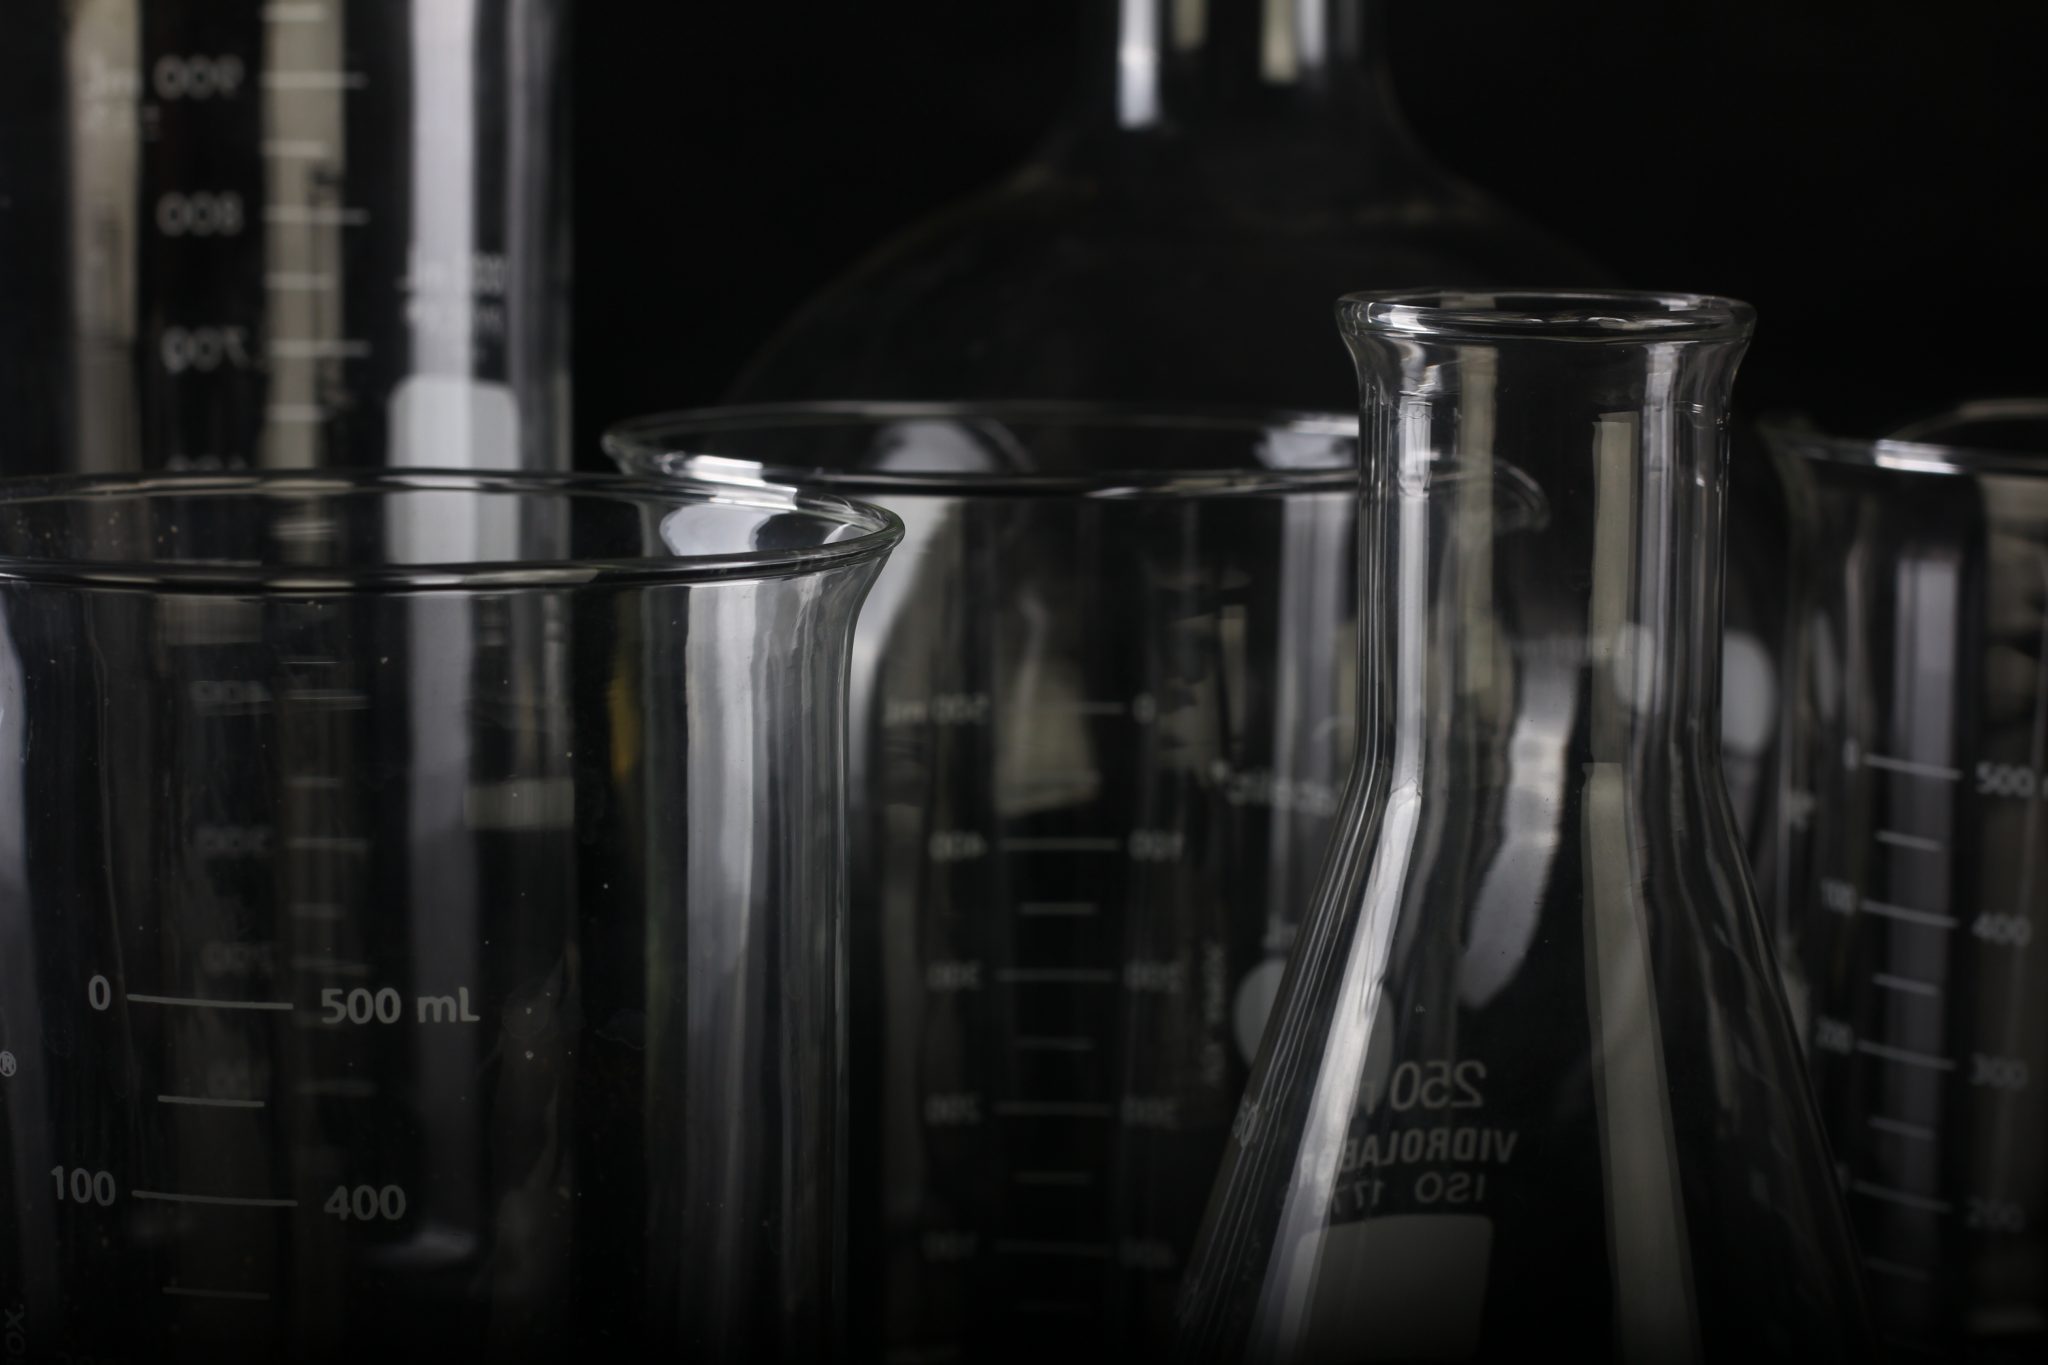 Scientific glass flasks and beakers of various sized against a black background, symbolizing the opioid fentanyl overdose crisis.